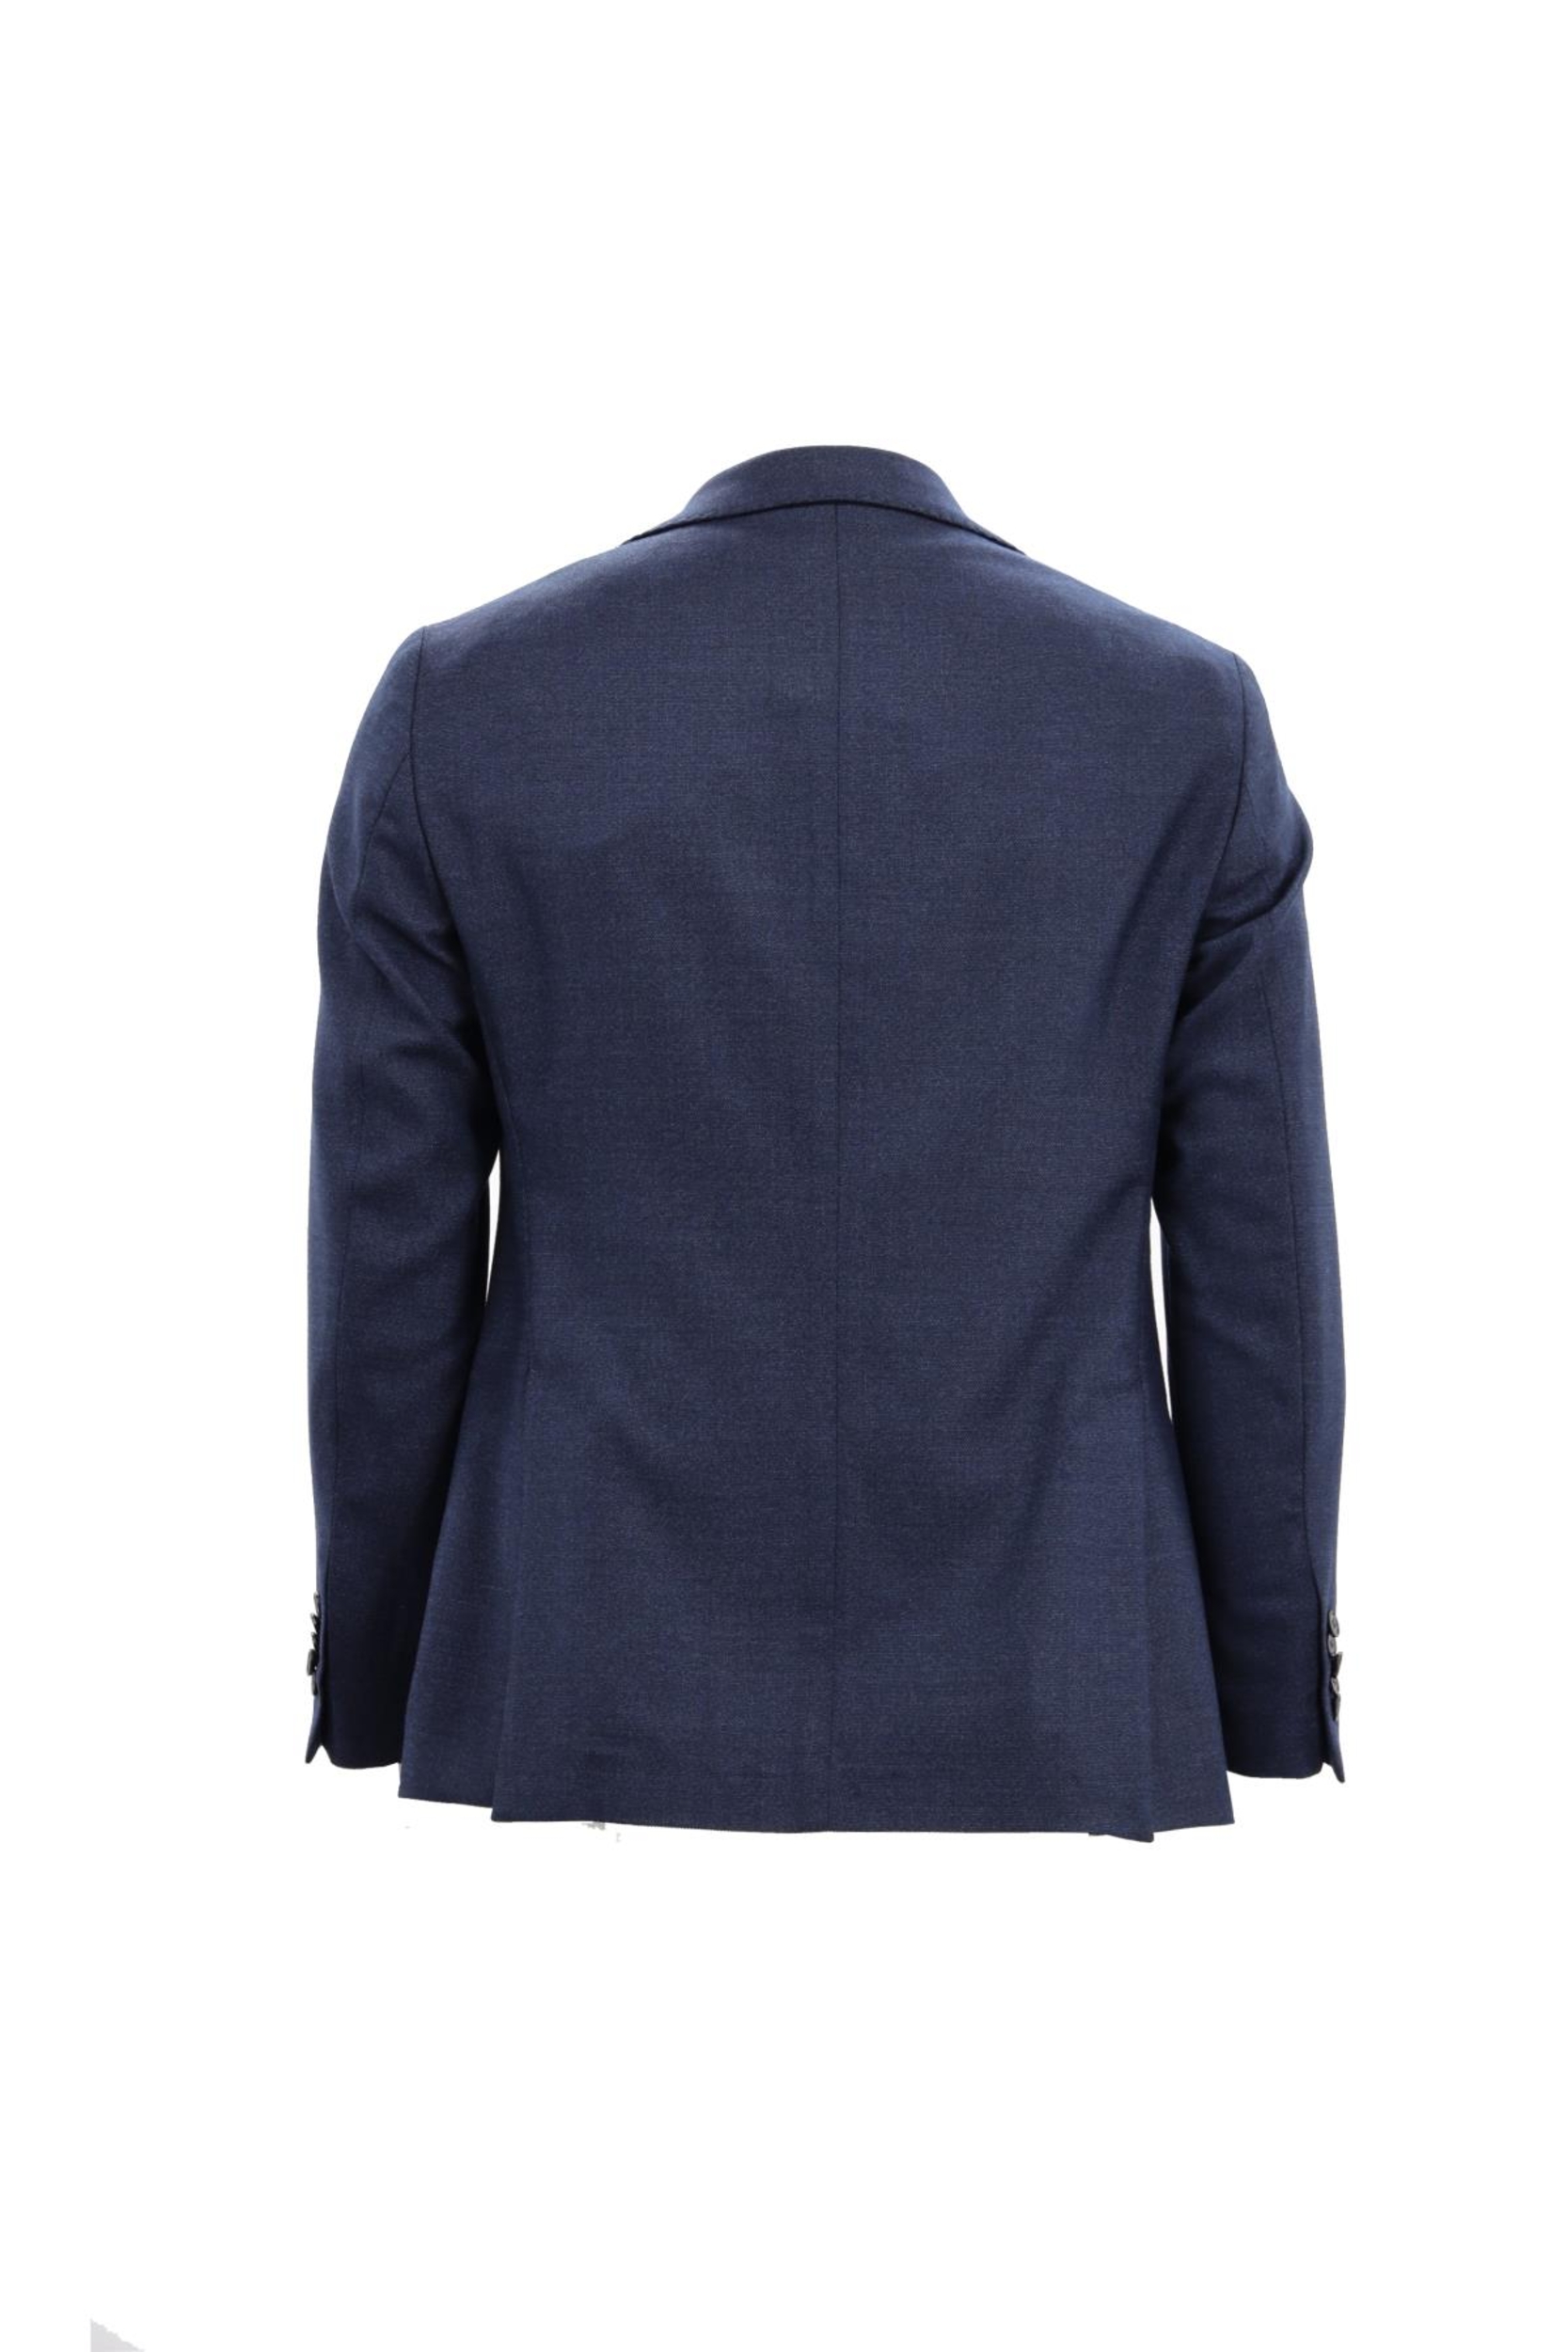 Picture of Giovane Gentile Jacket